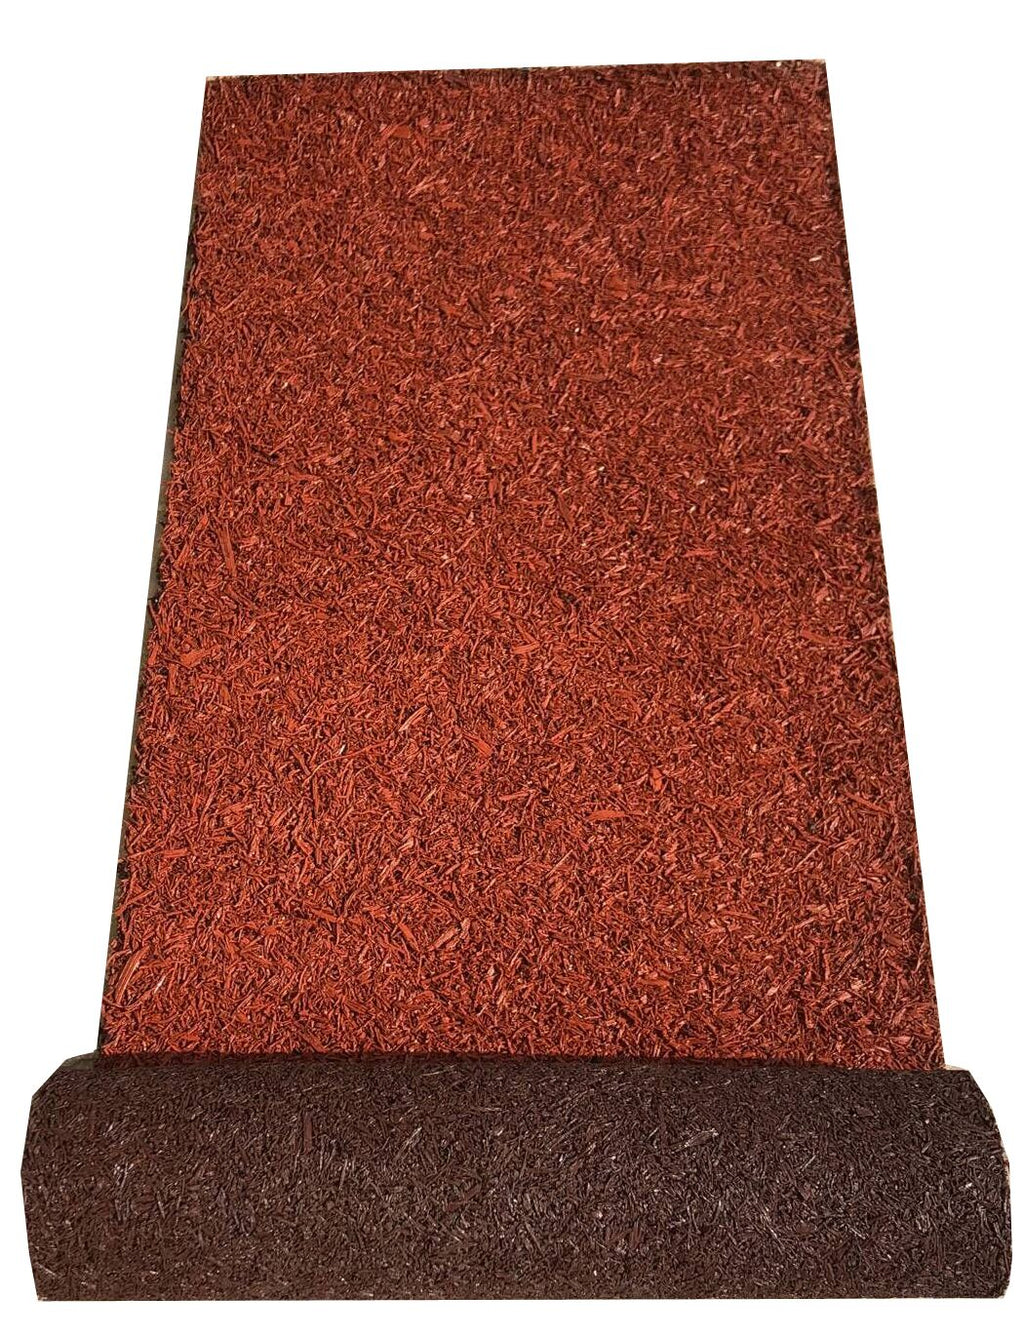 Recycled Rubber Mulch Pathway | Reversible Brown or Red